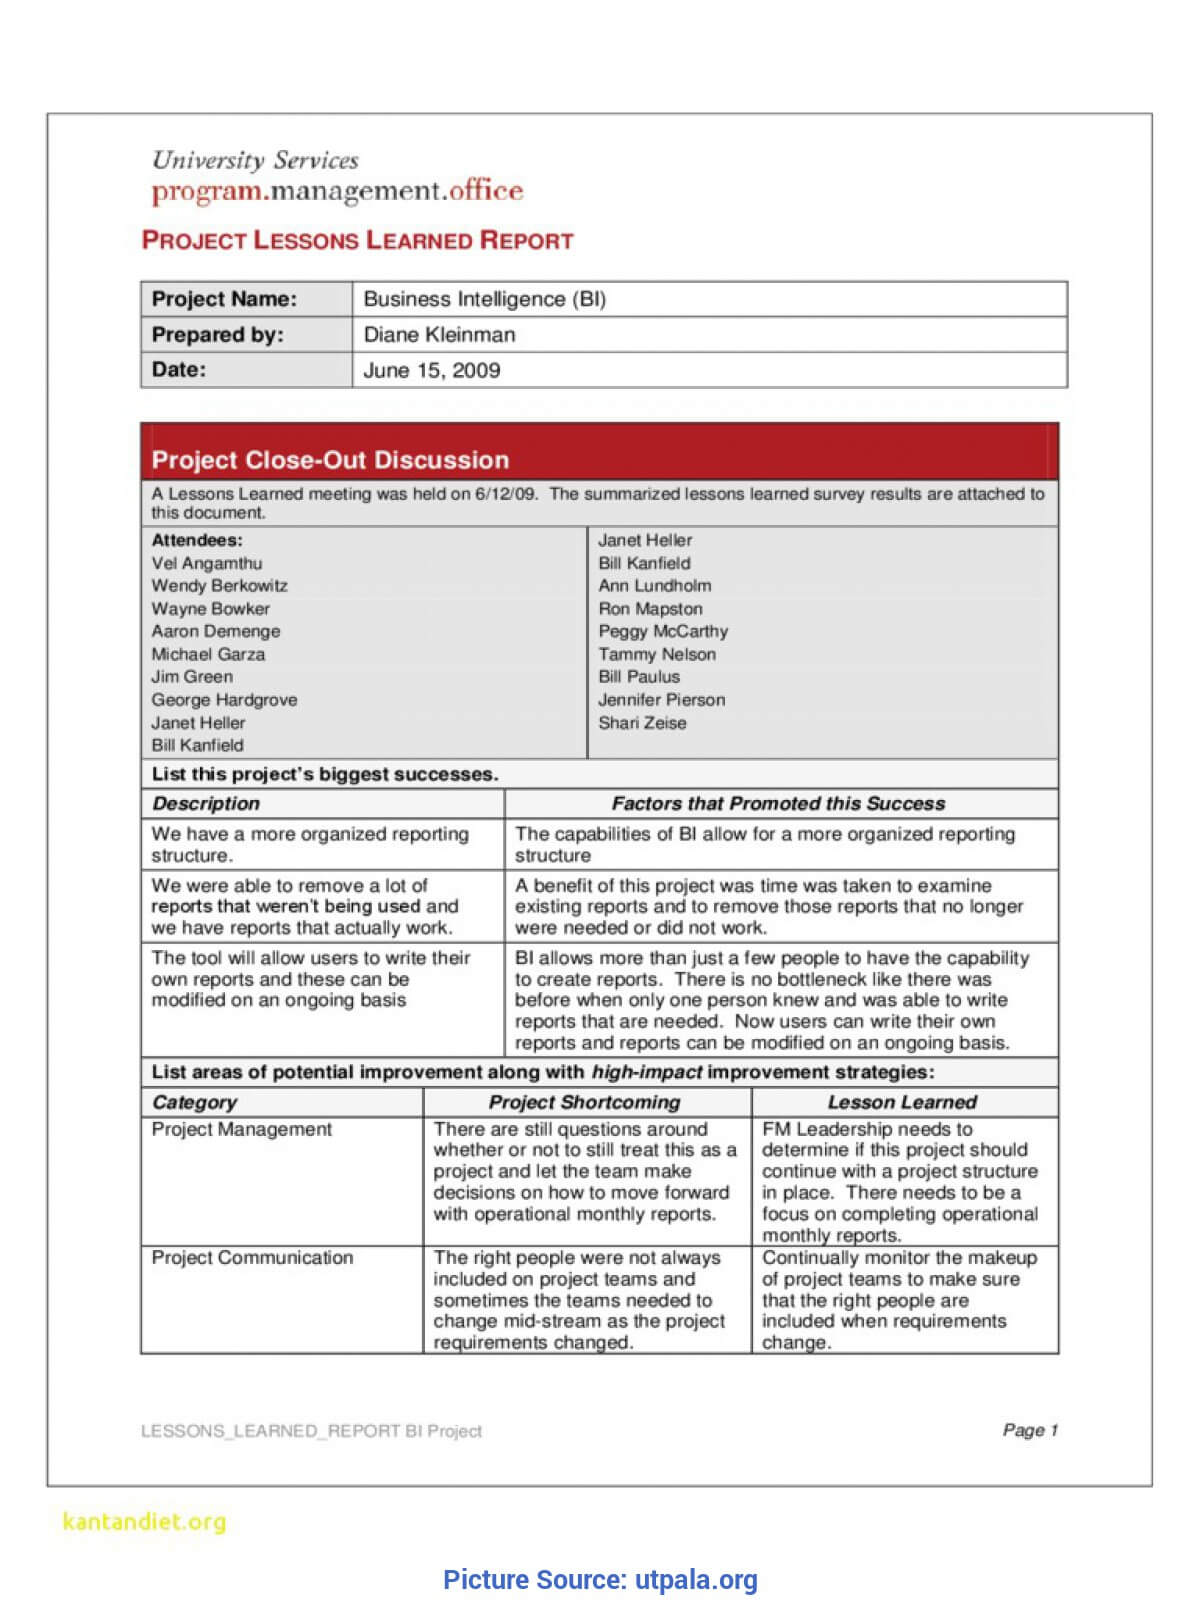 Trending Lessons Learned Document Management Lovely Lessons For Prince2 Lessons Learned Report Template